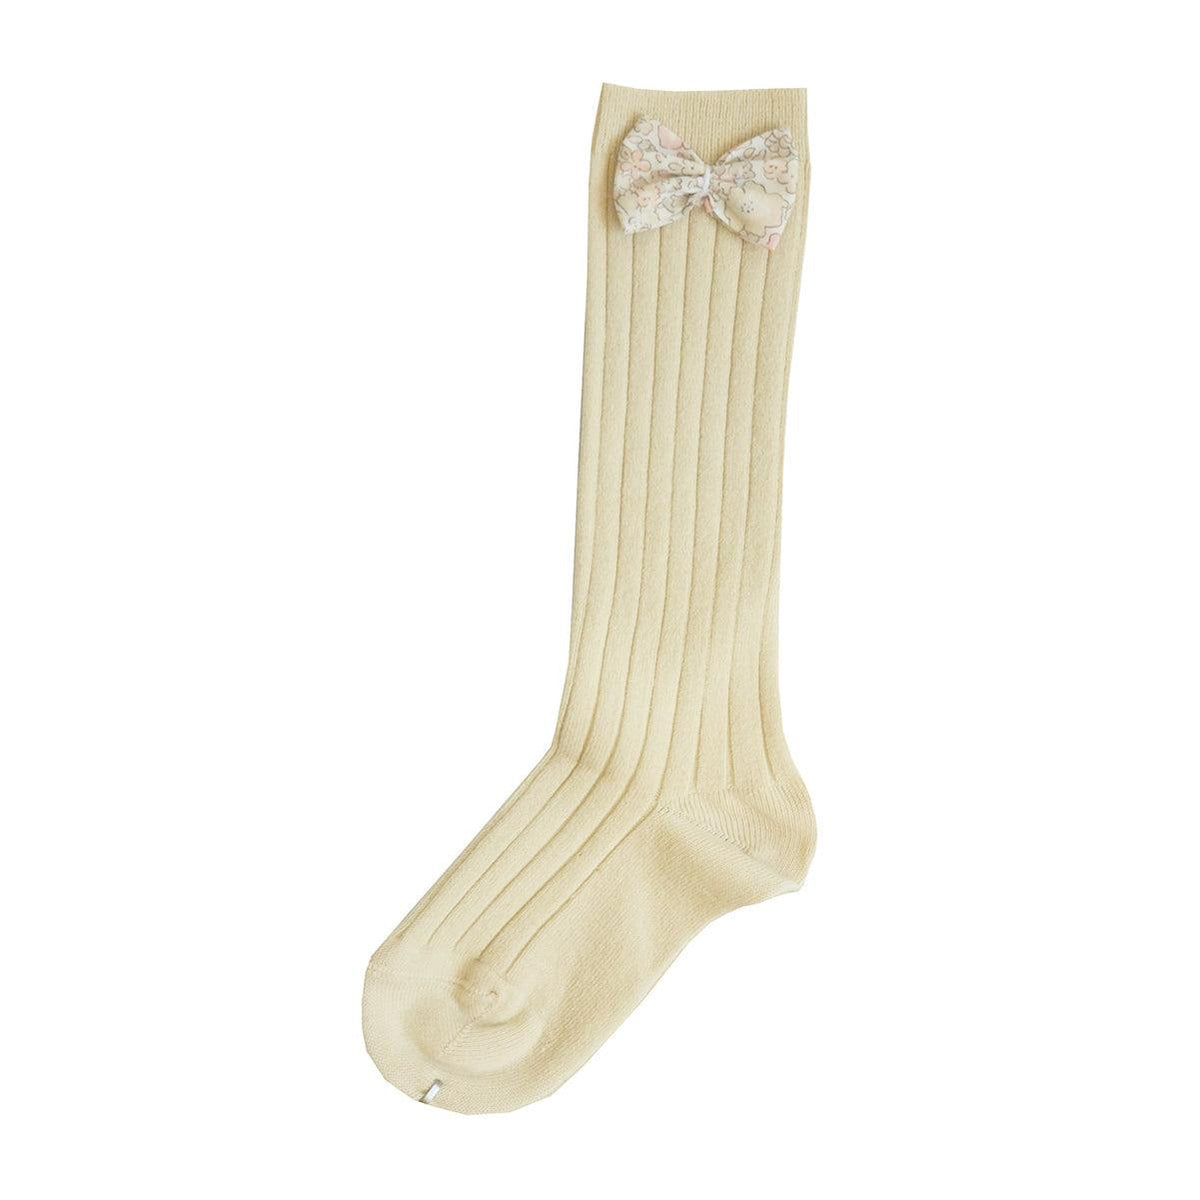 Buttermilk Knee High Socks with Bow made with Liberty Fabric MICHELLE SAND - Coco & Wolf